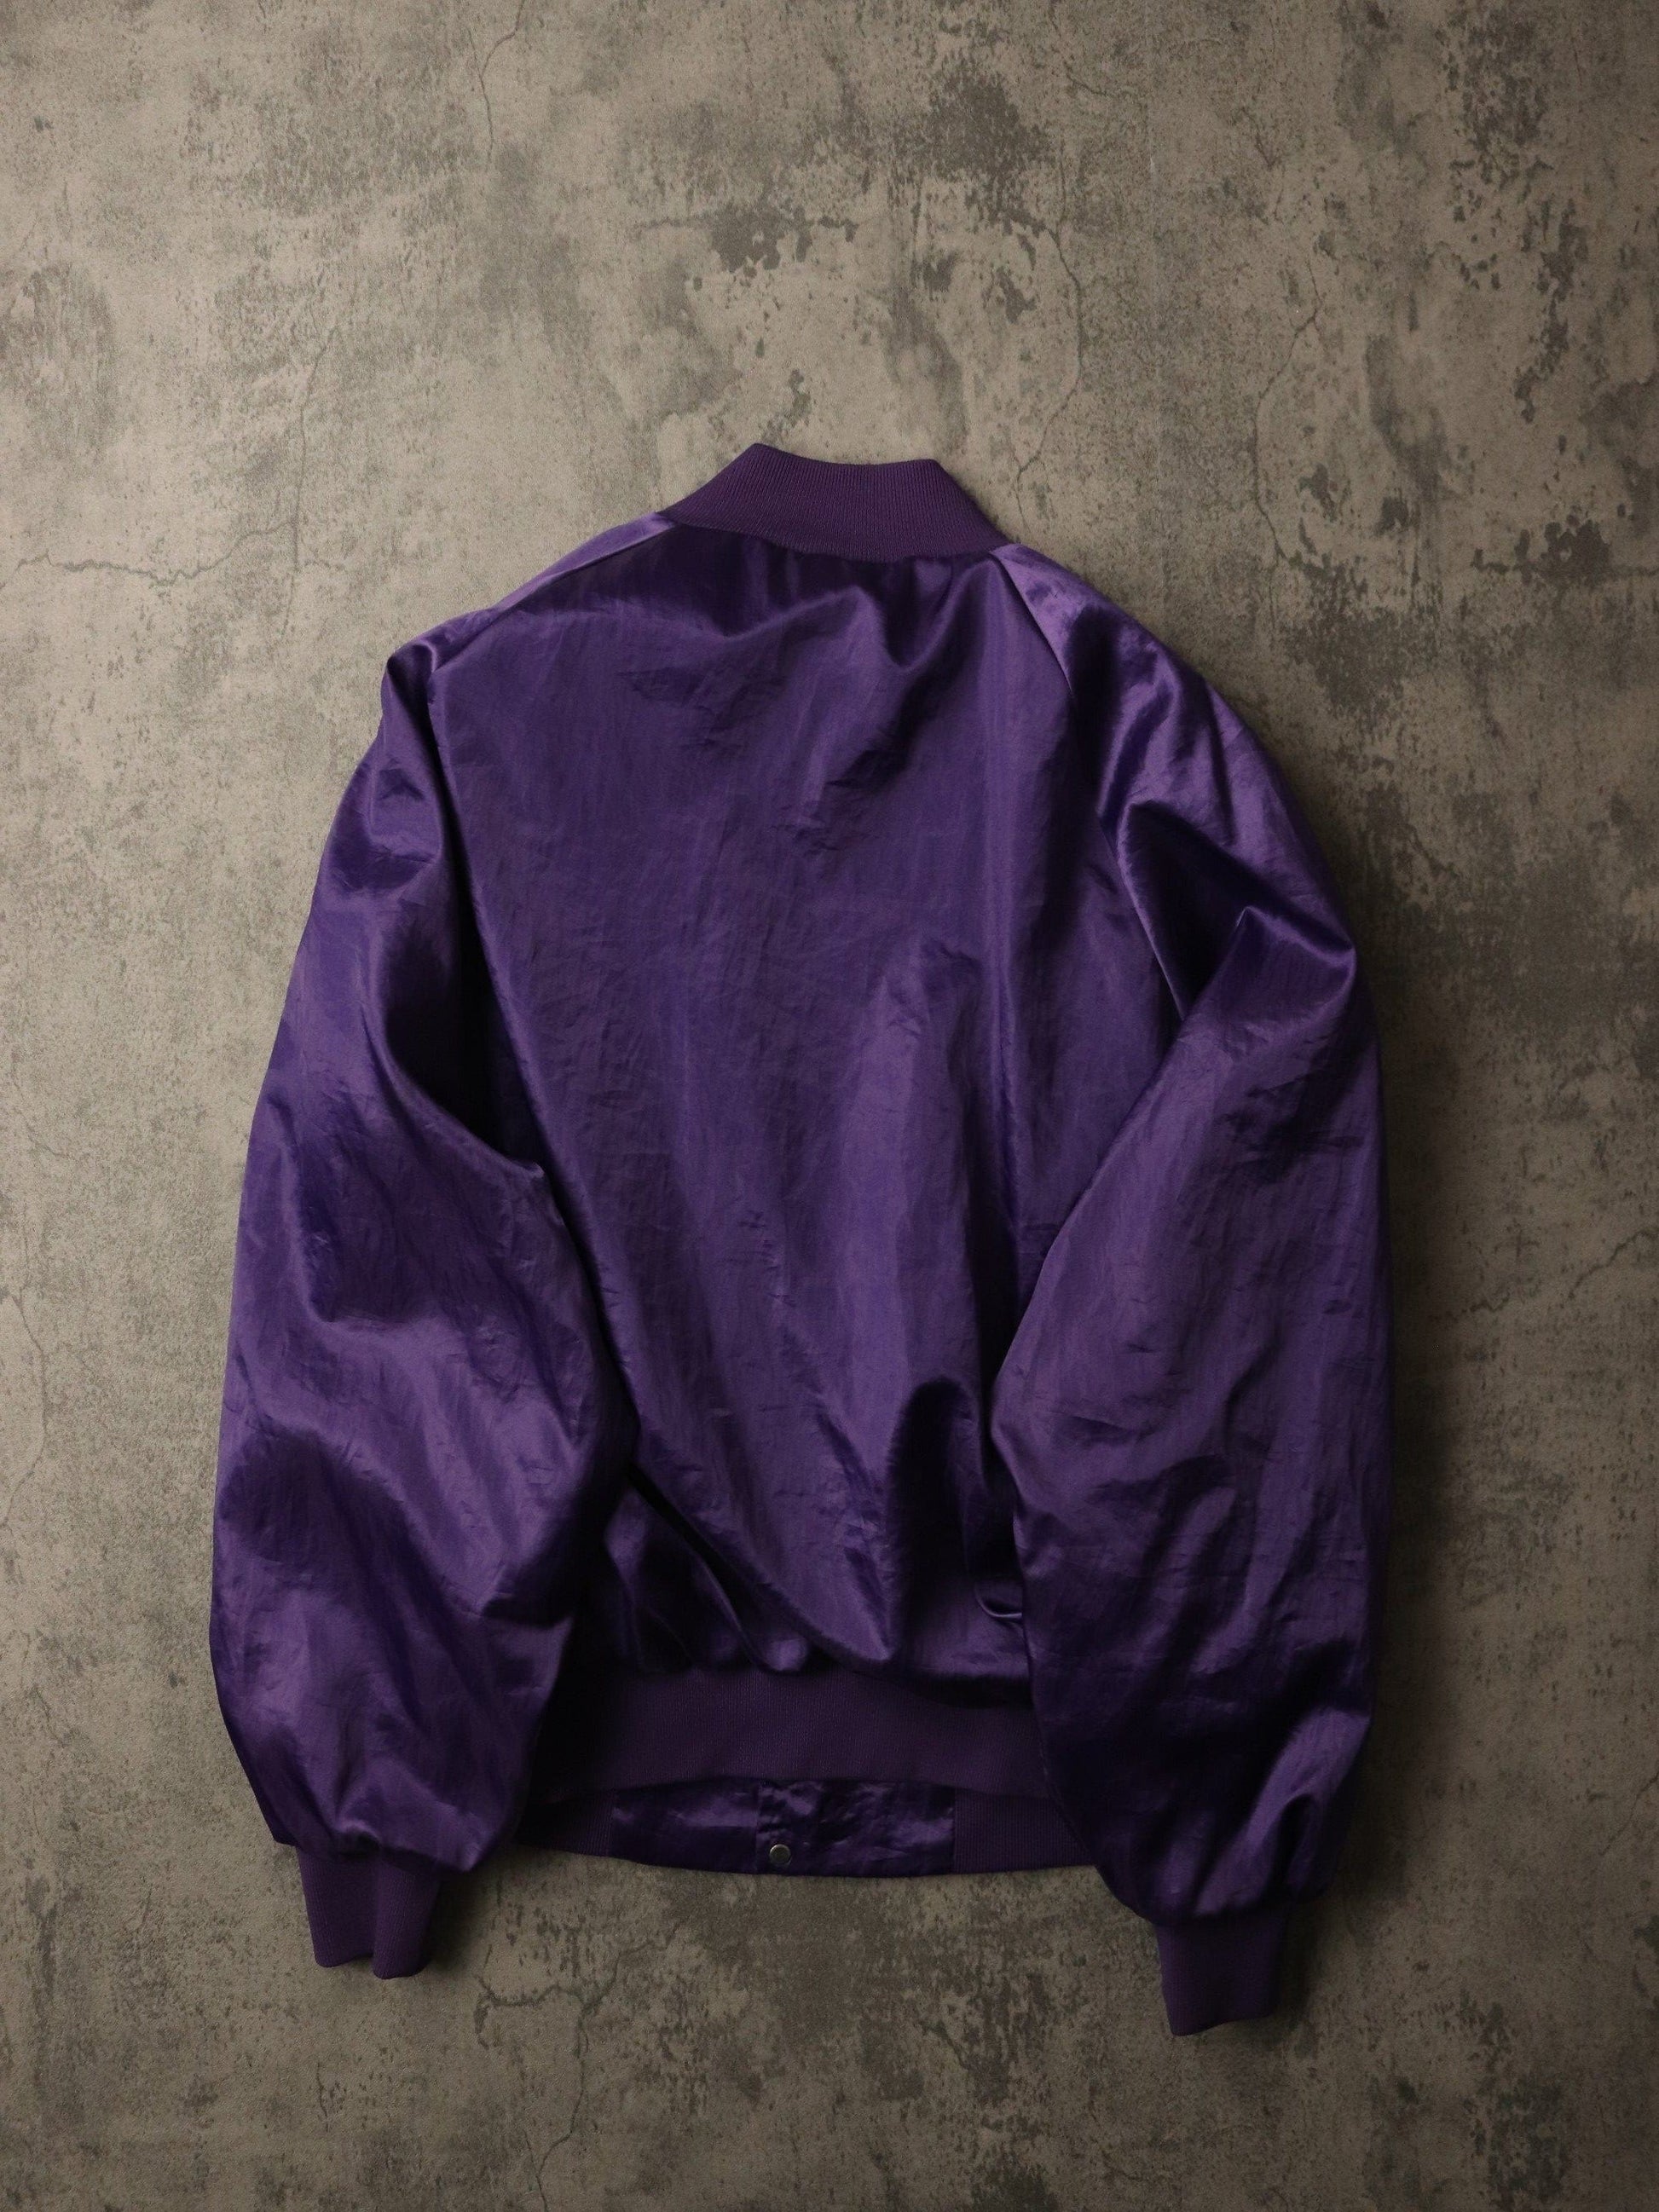 Other Jackets & Coats Vintage WWS Electrical Jacket Fits Mens Large Purple Satin Snap On Bomber